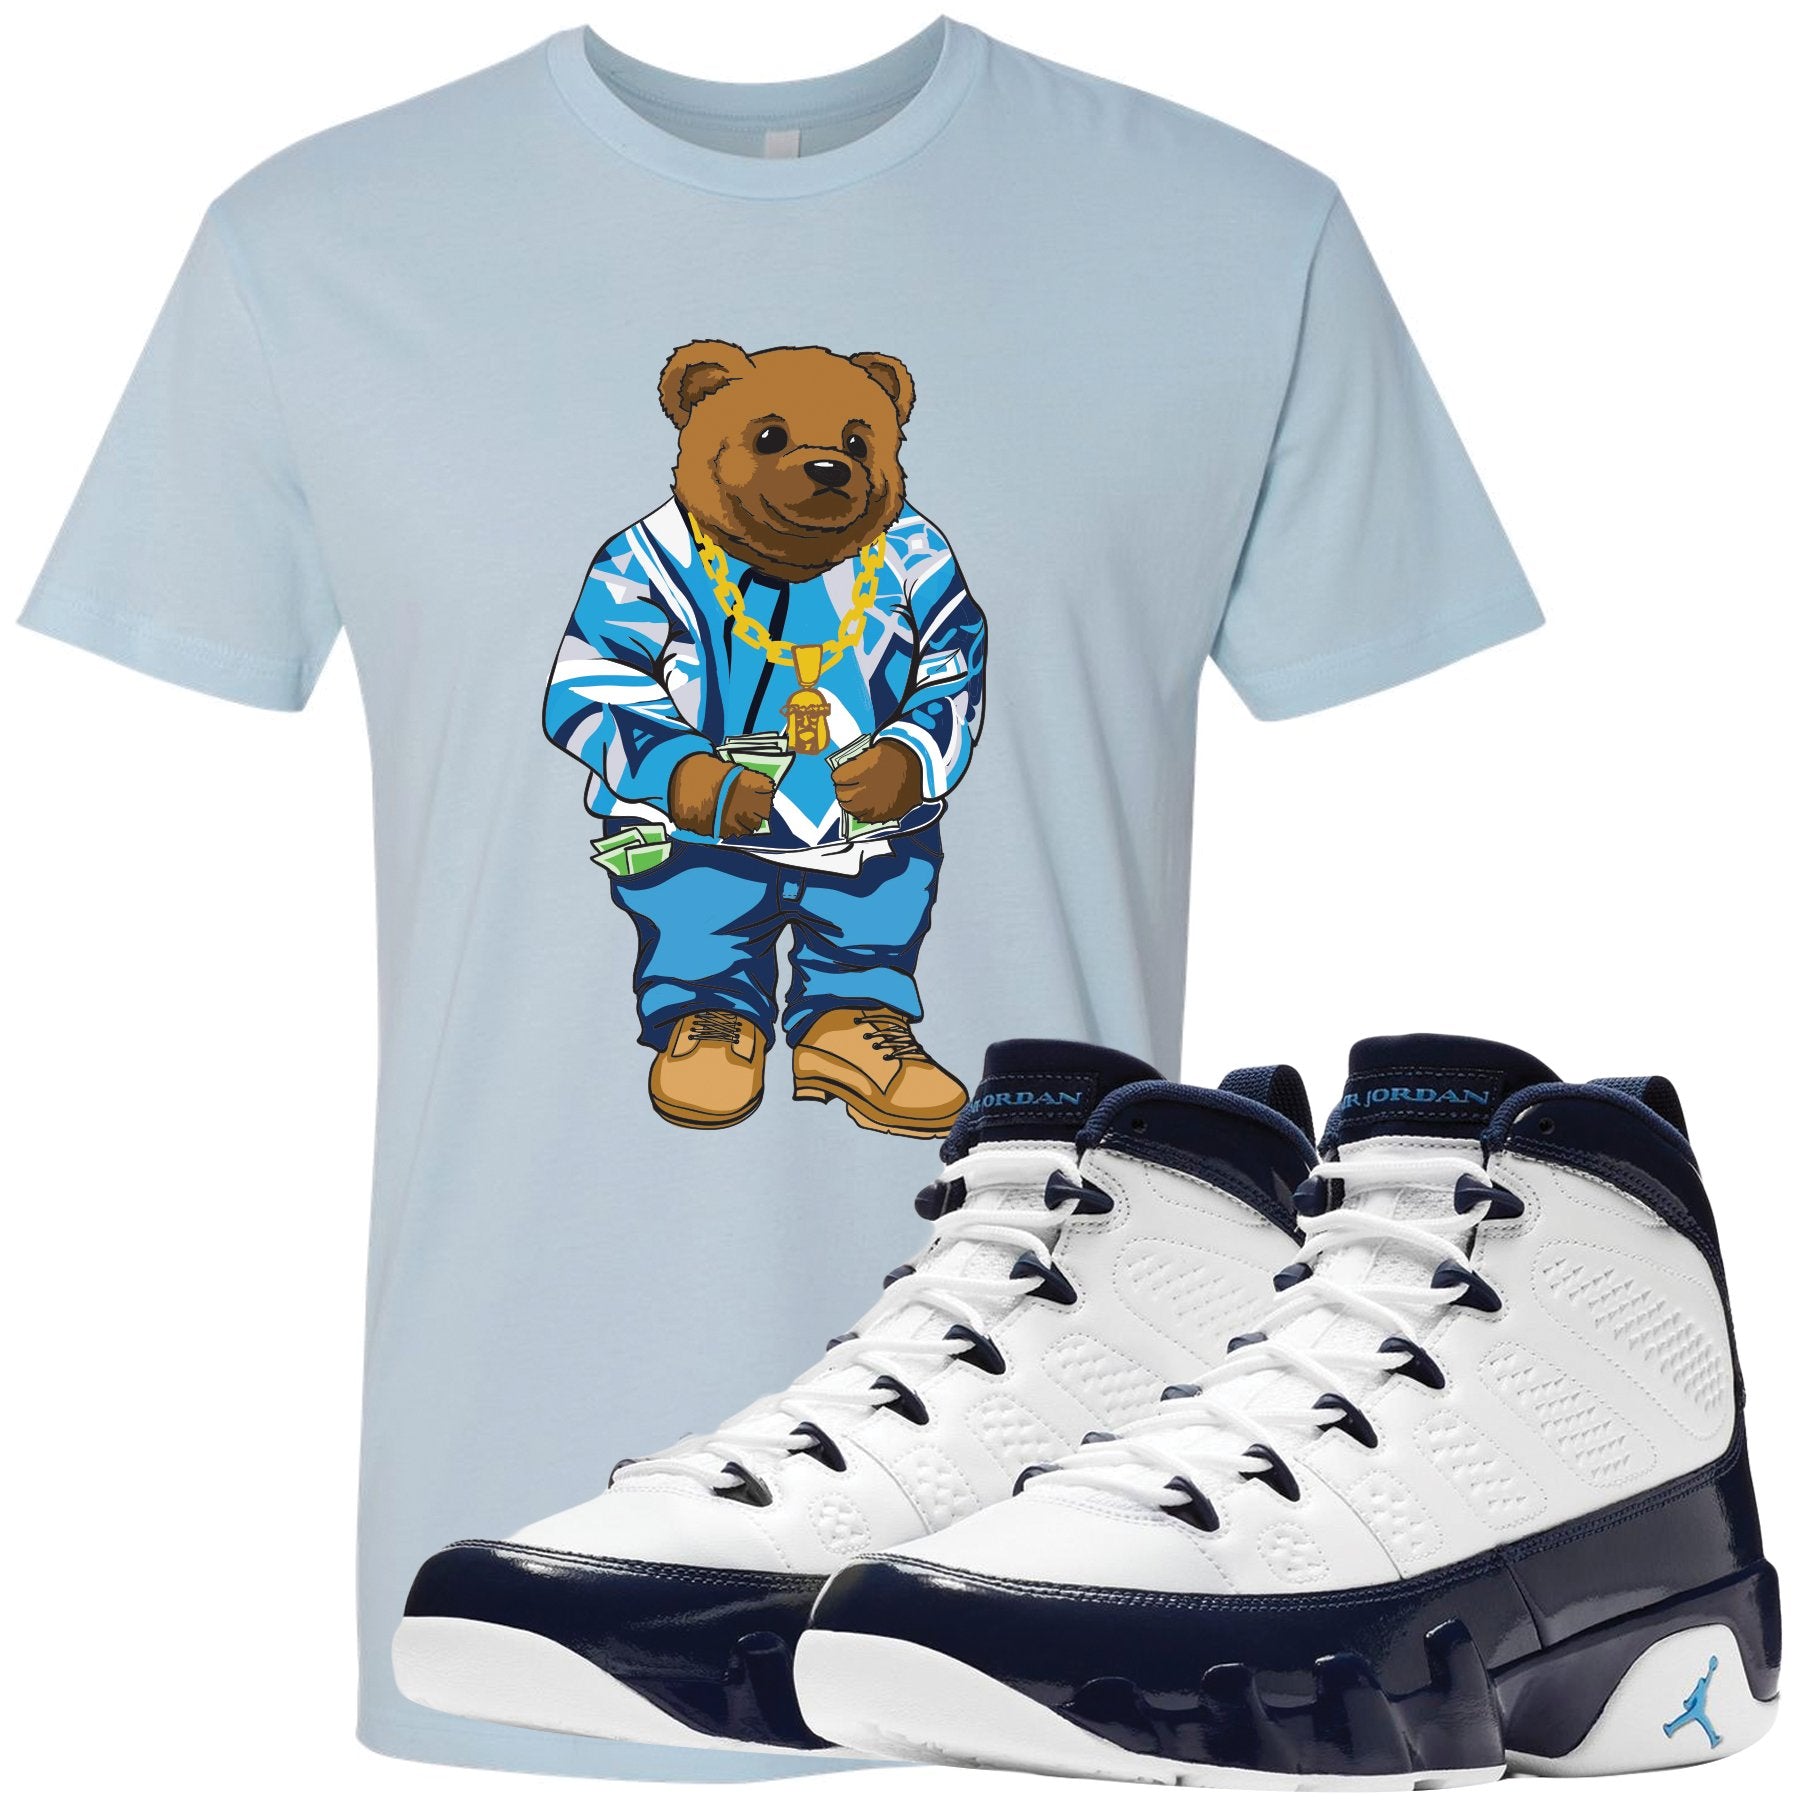 Match your pair of Jordan 9 UNC All Star Blue Pearl sneakers with this sneaker matching Jordan 9 UNC tee